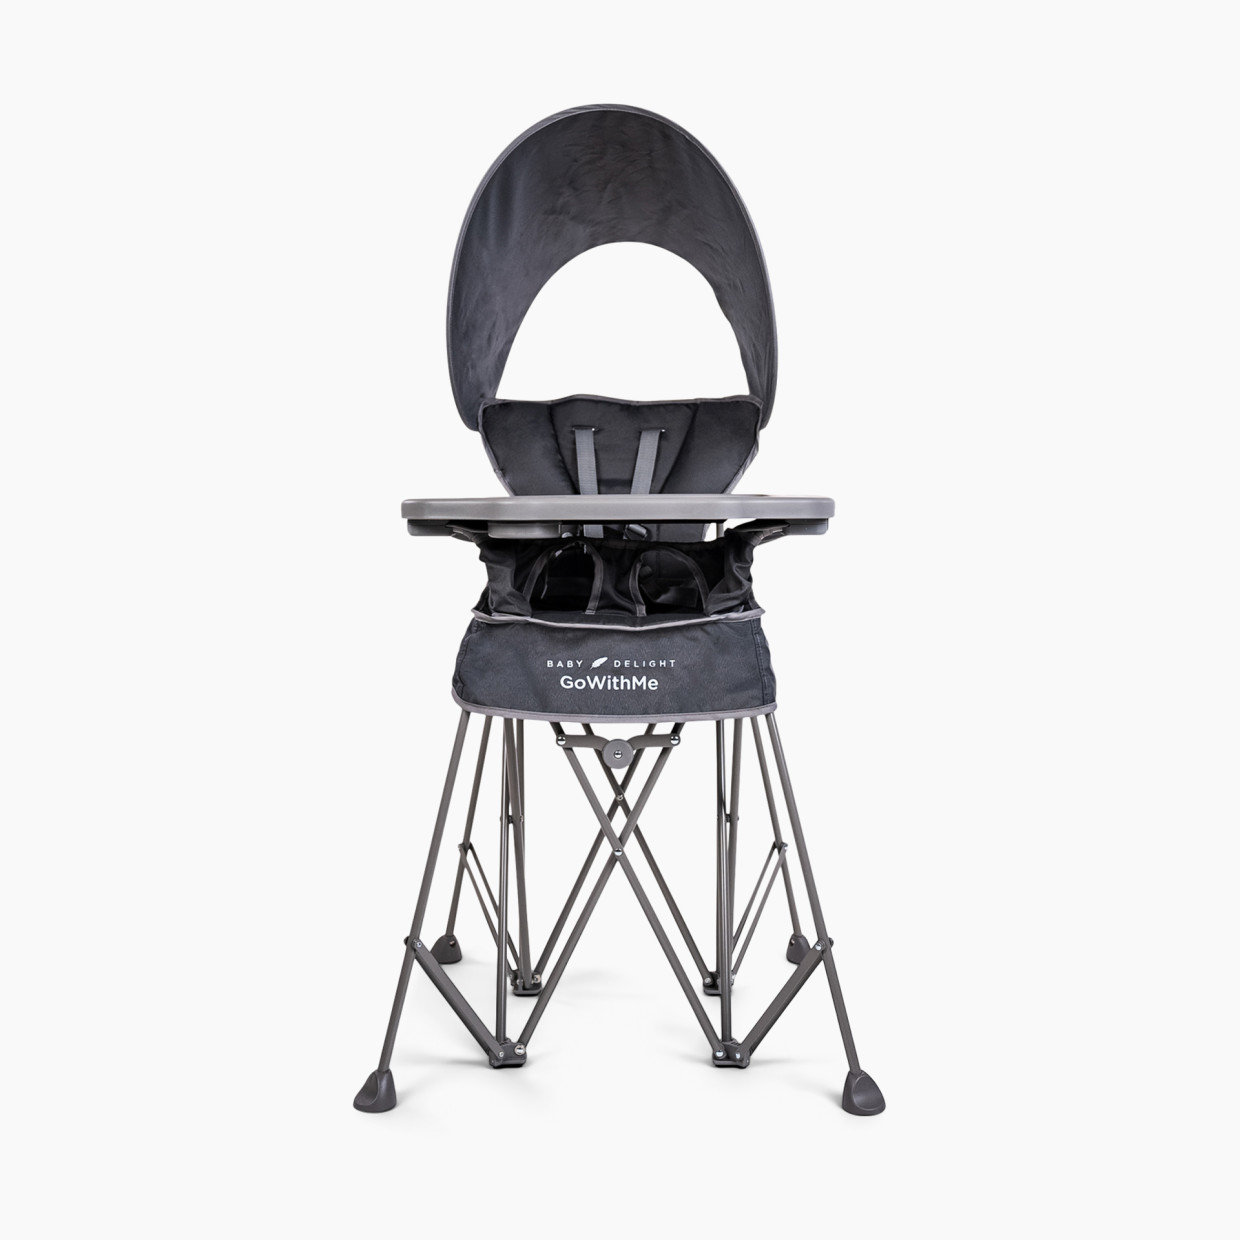 Baby Delight Go With Me Uplift Deluxe Portable High Chair With Canopy - Grey.